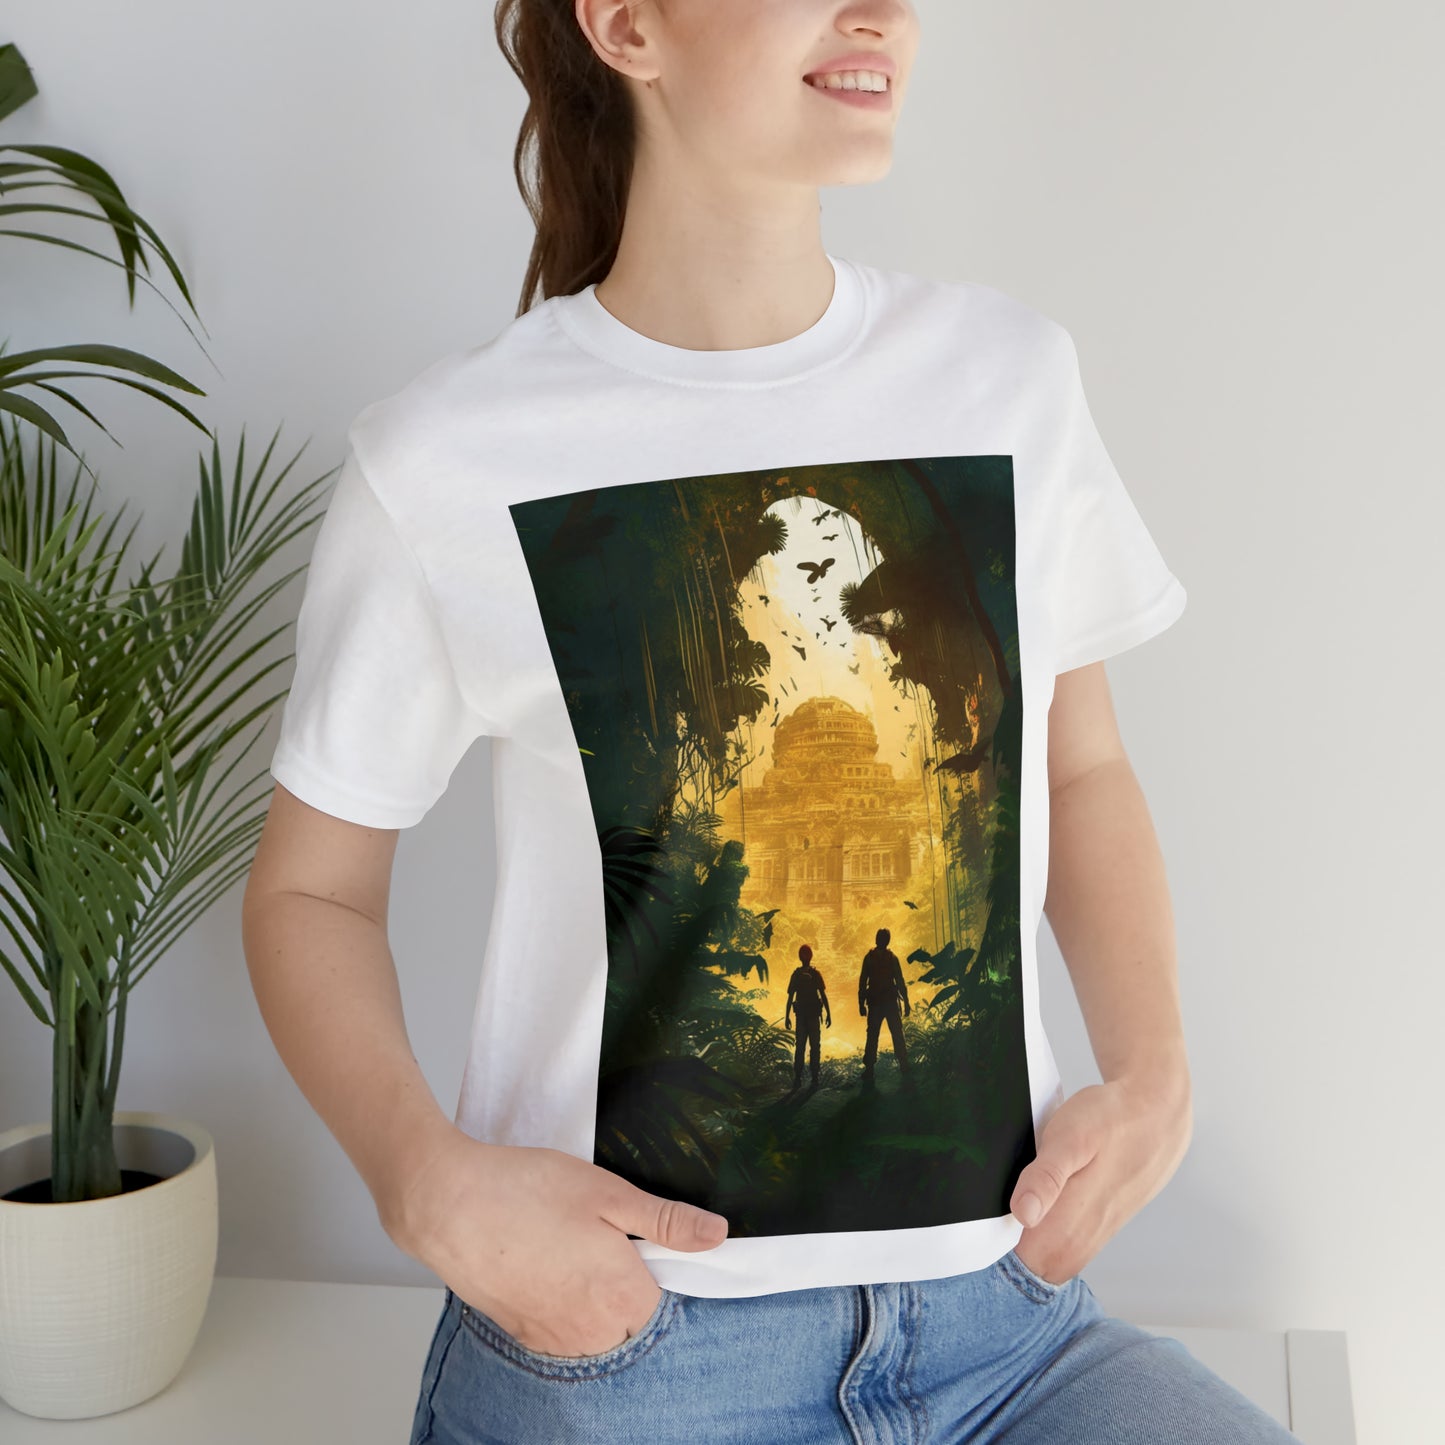 white-quest-thread-tee-shirt-with-ruins-of-arnak-scene-on-front